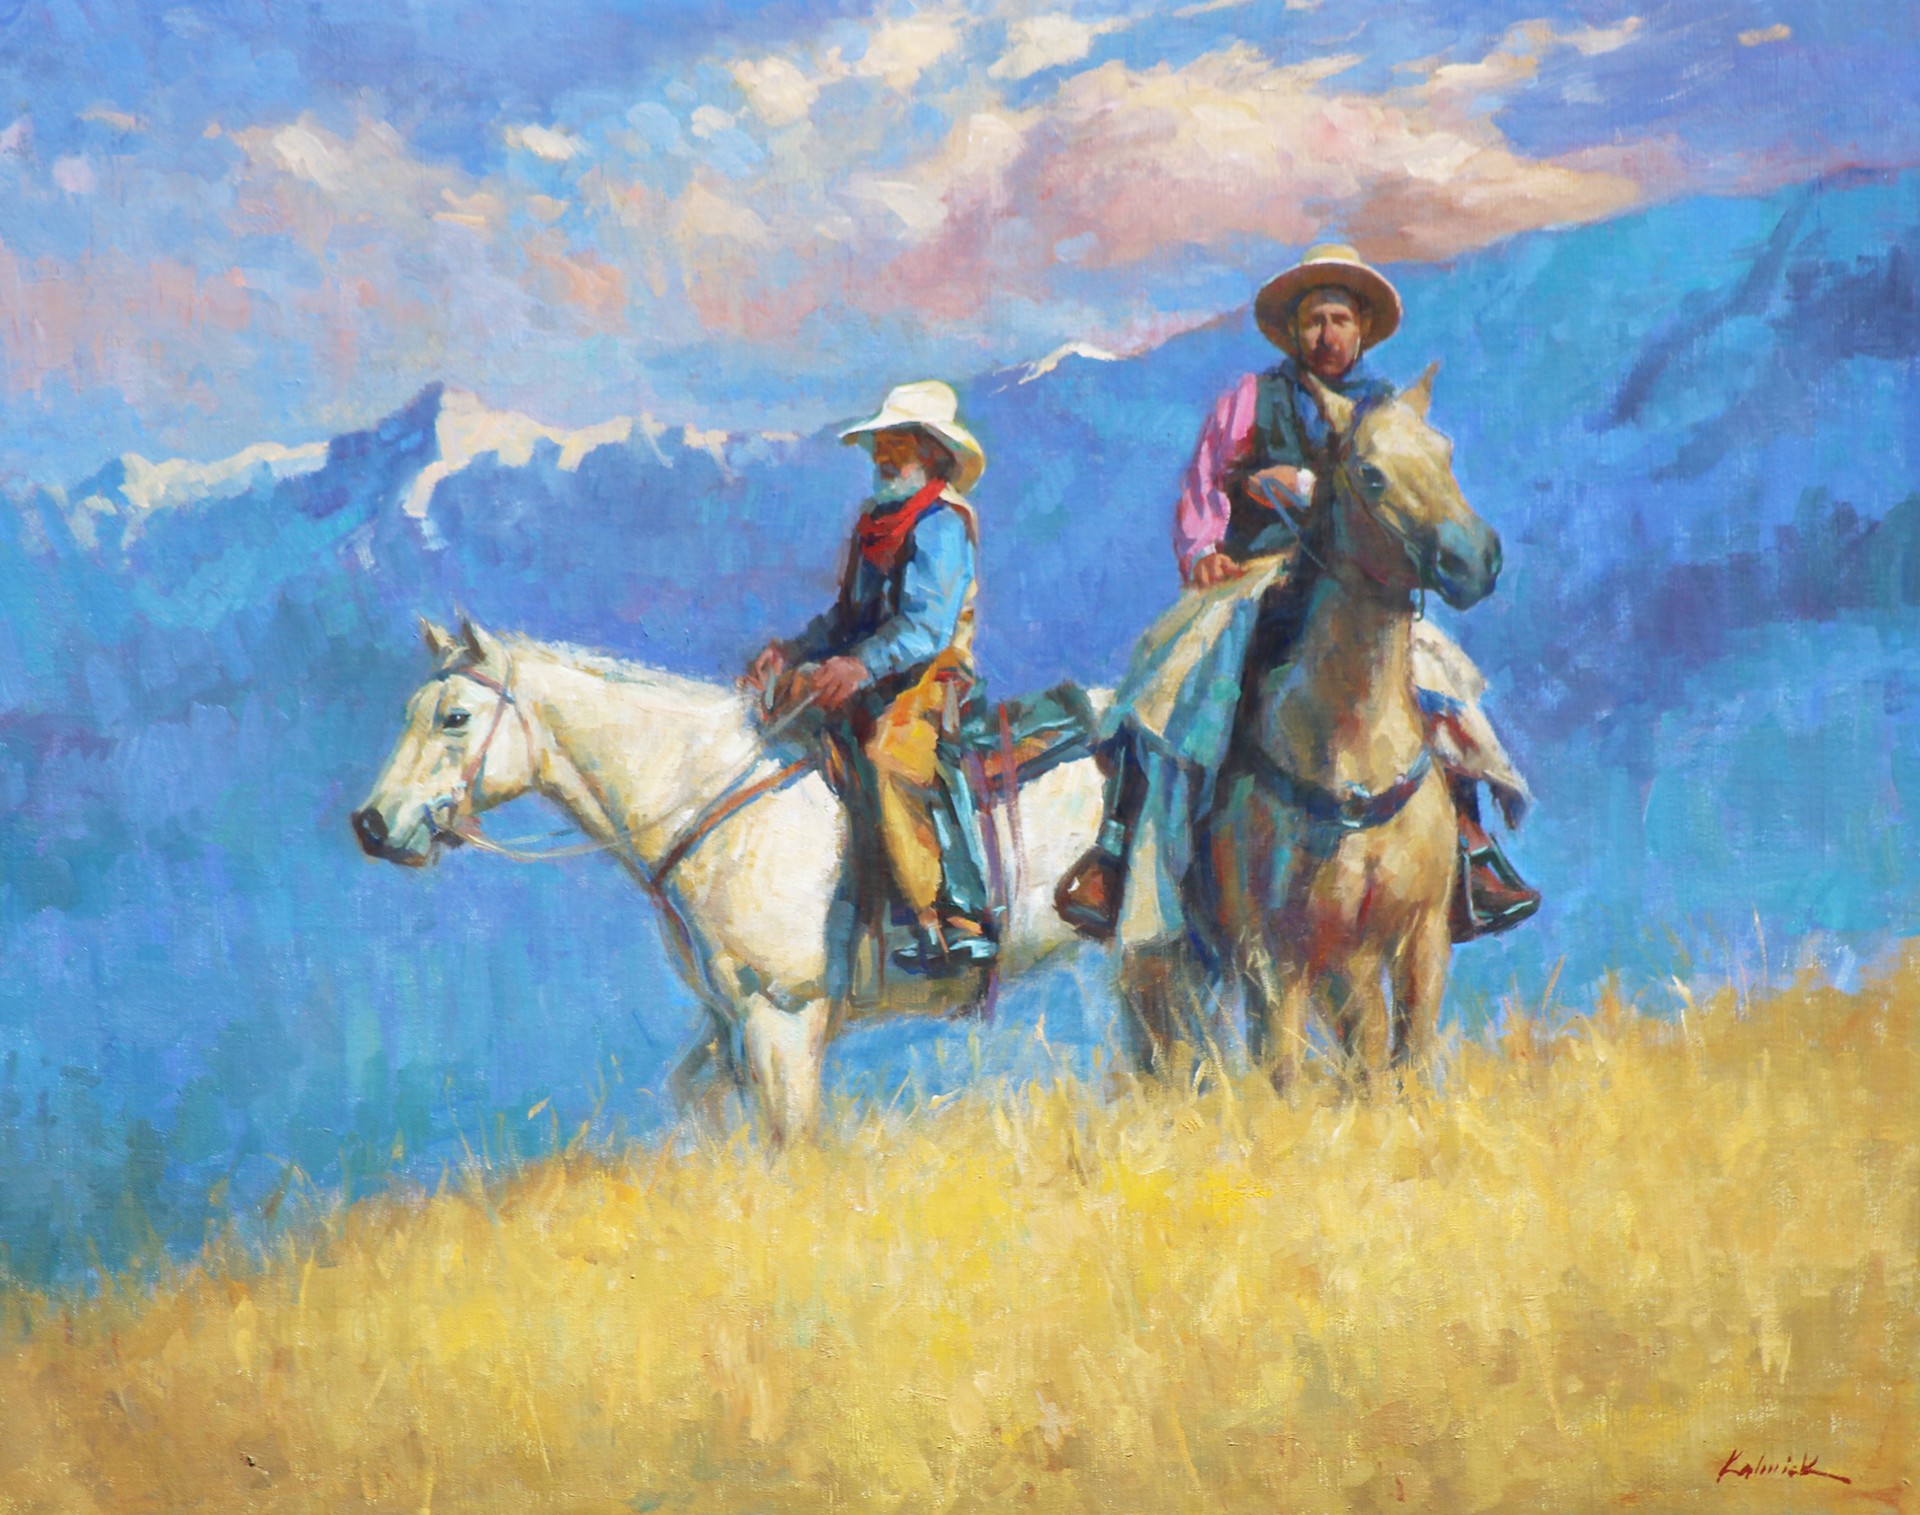 The High Country by William J. Kalwick Jr.